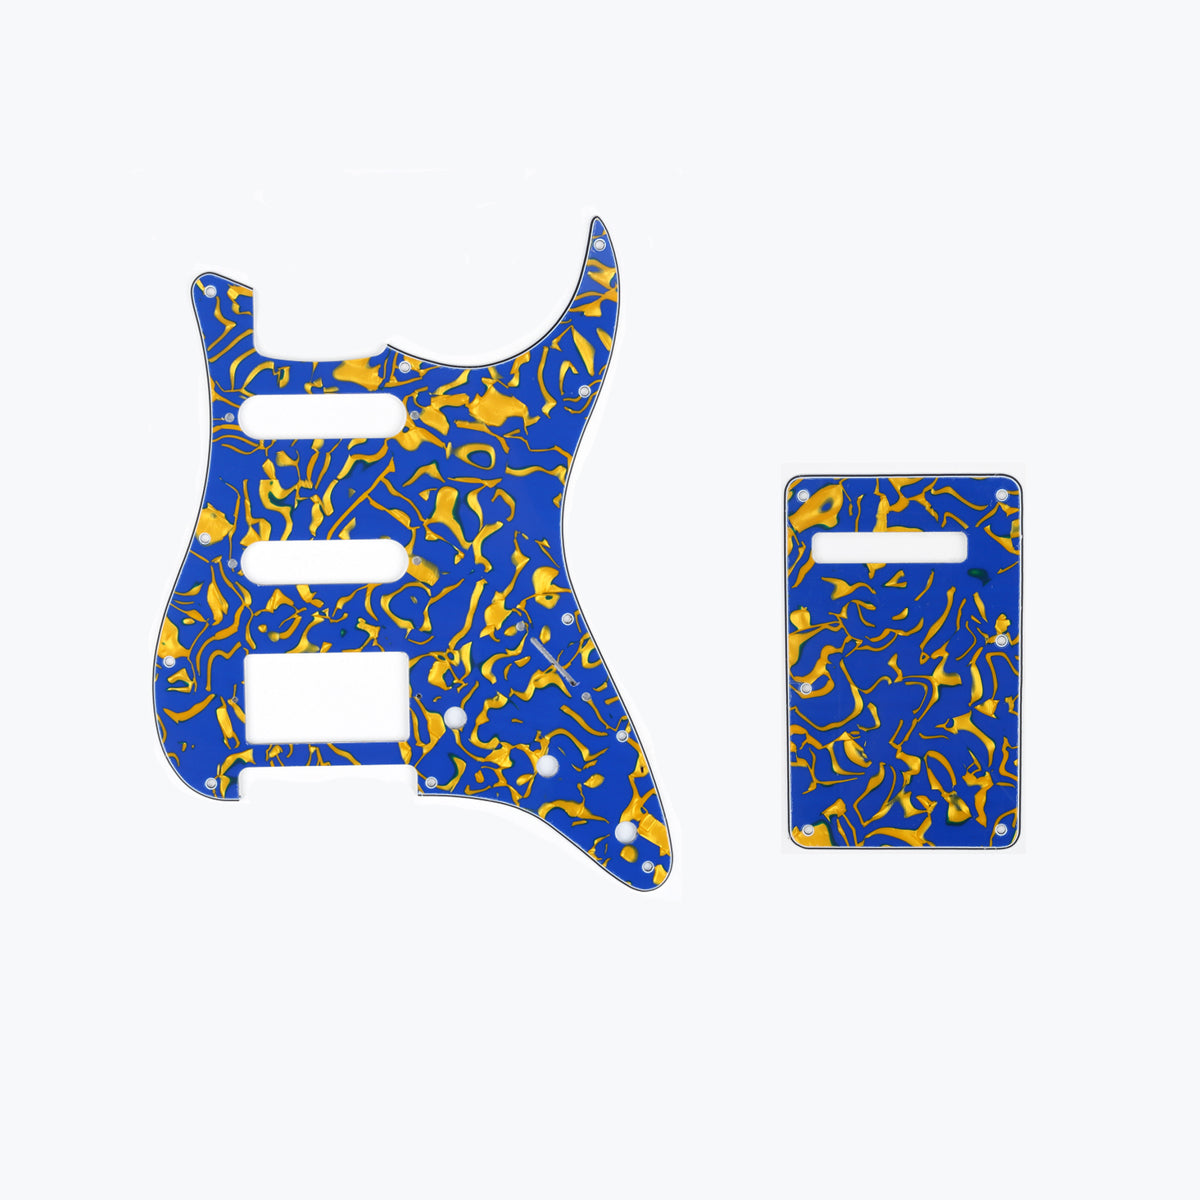 Musiclily SSH 11 Hole Strat Guitar Pickguard and BackPlate Set for Fender USA/Mexican Standard Stratocaster Modern Style, 4Ply Blue Yellow Shell